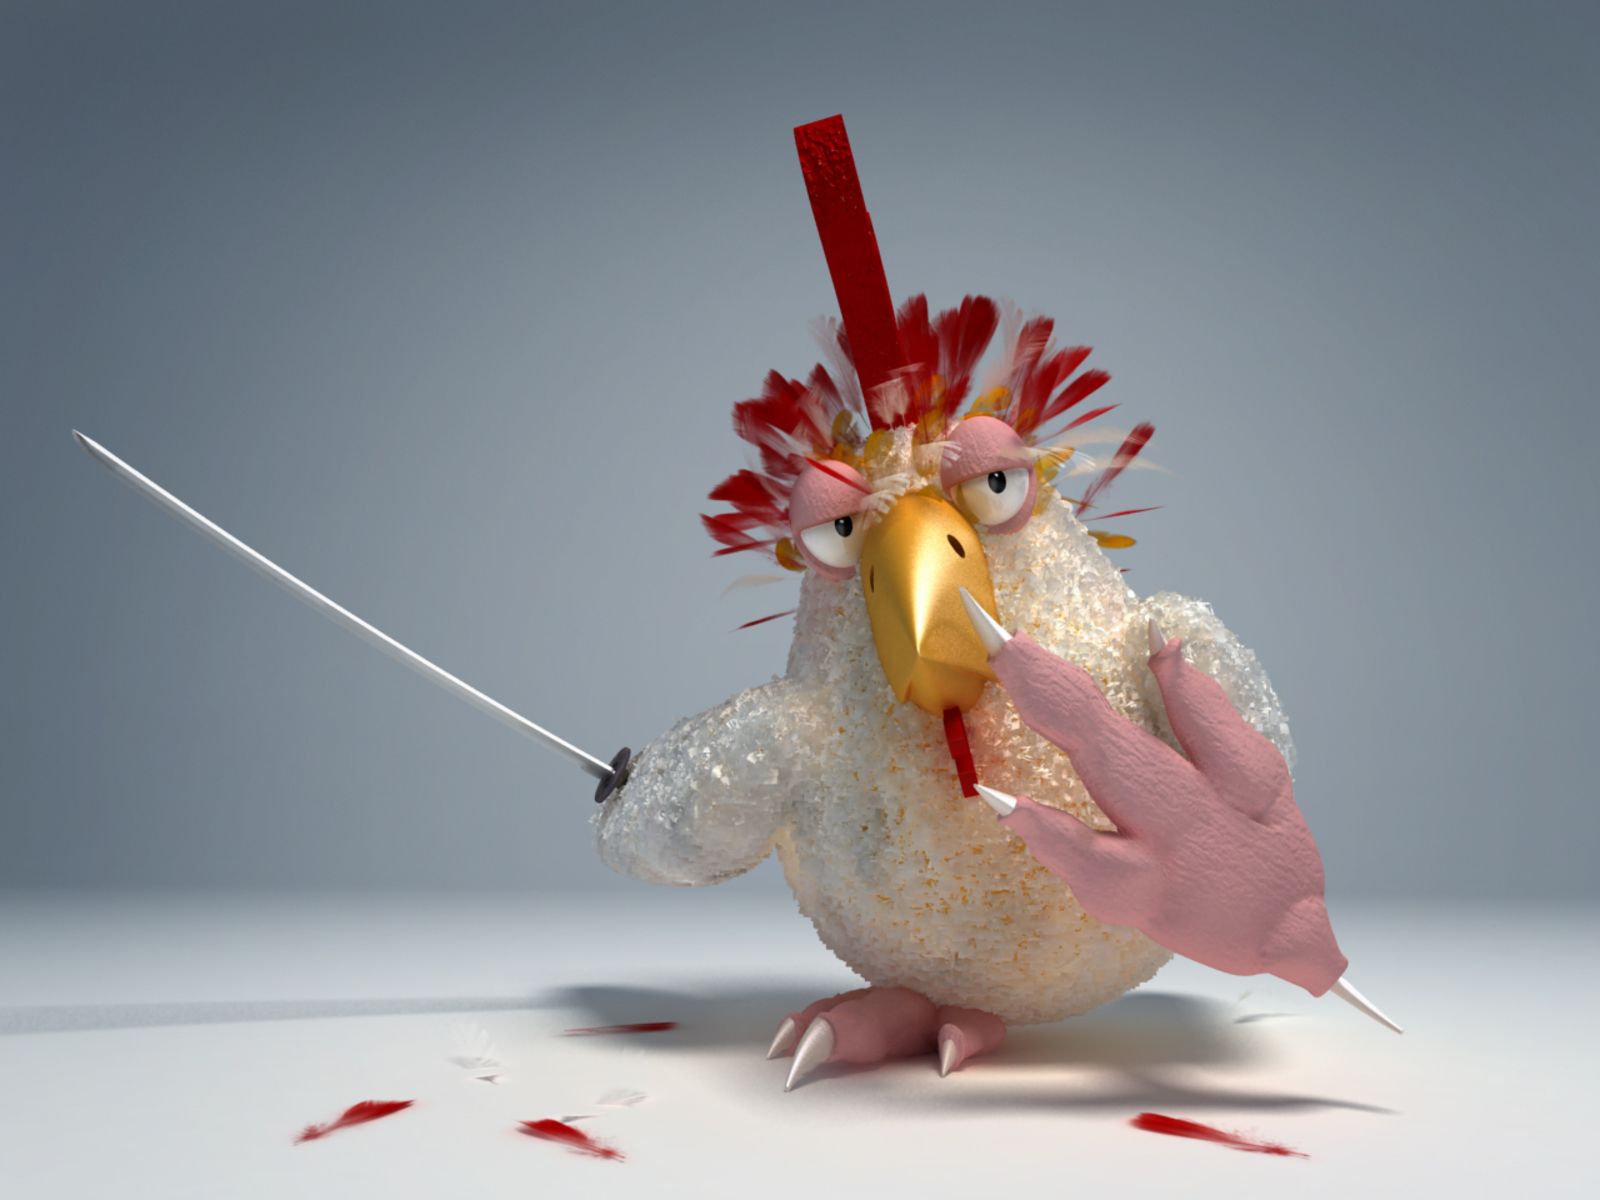 Bad rooster desktop PC and Mac wallpaper. Funny chicken picture, Chicken picture, Rooster funny